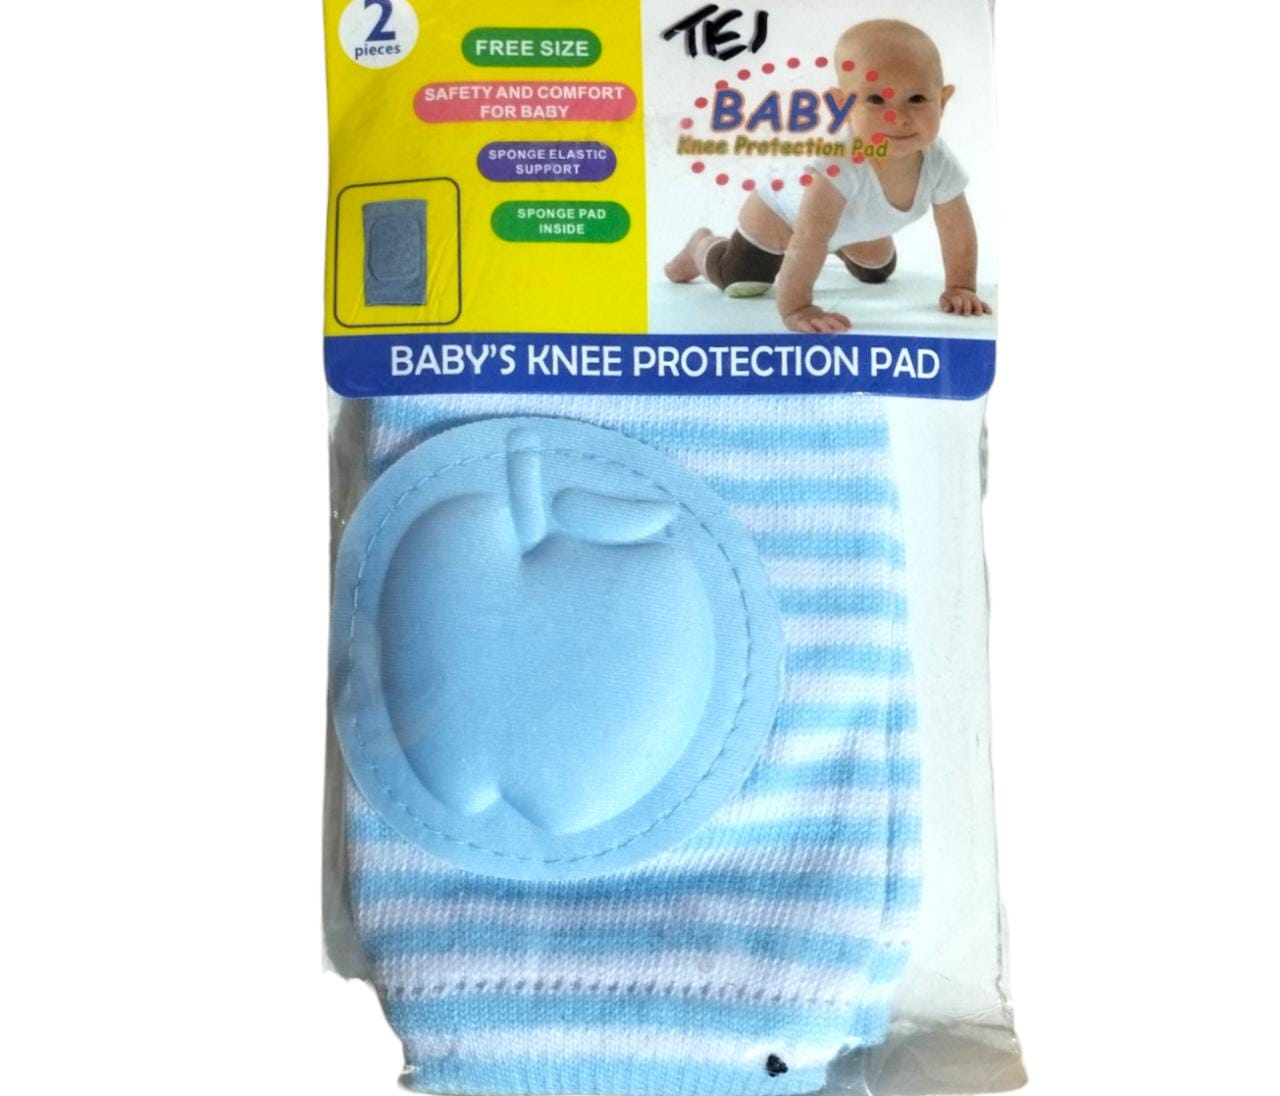 Baby knee protection